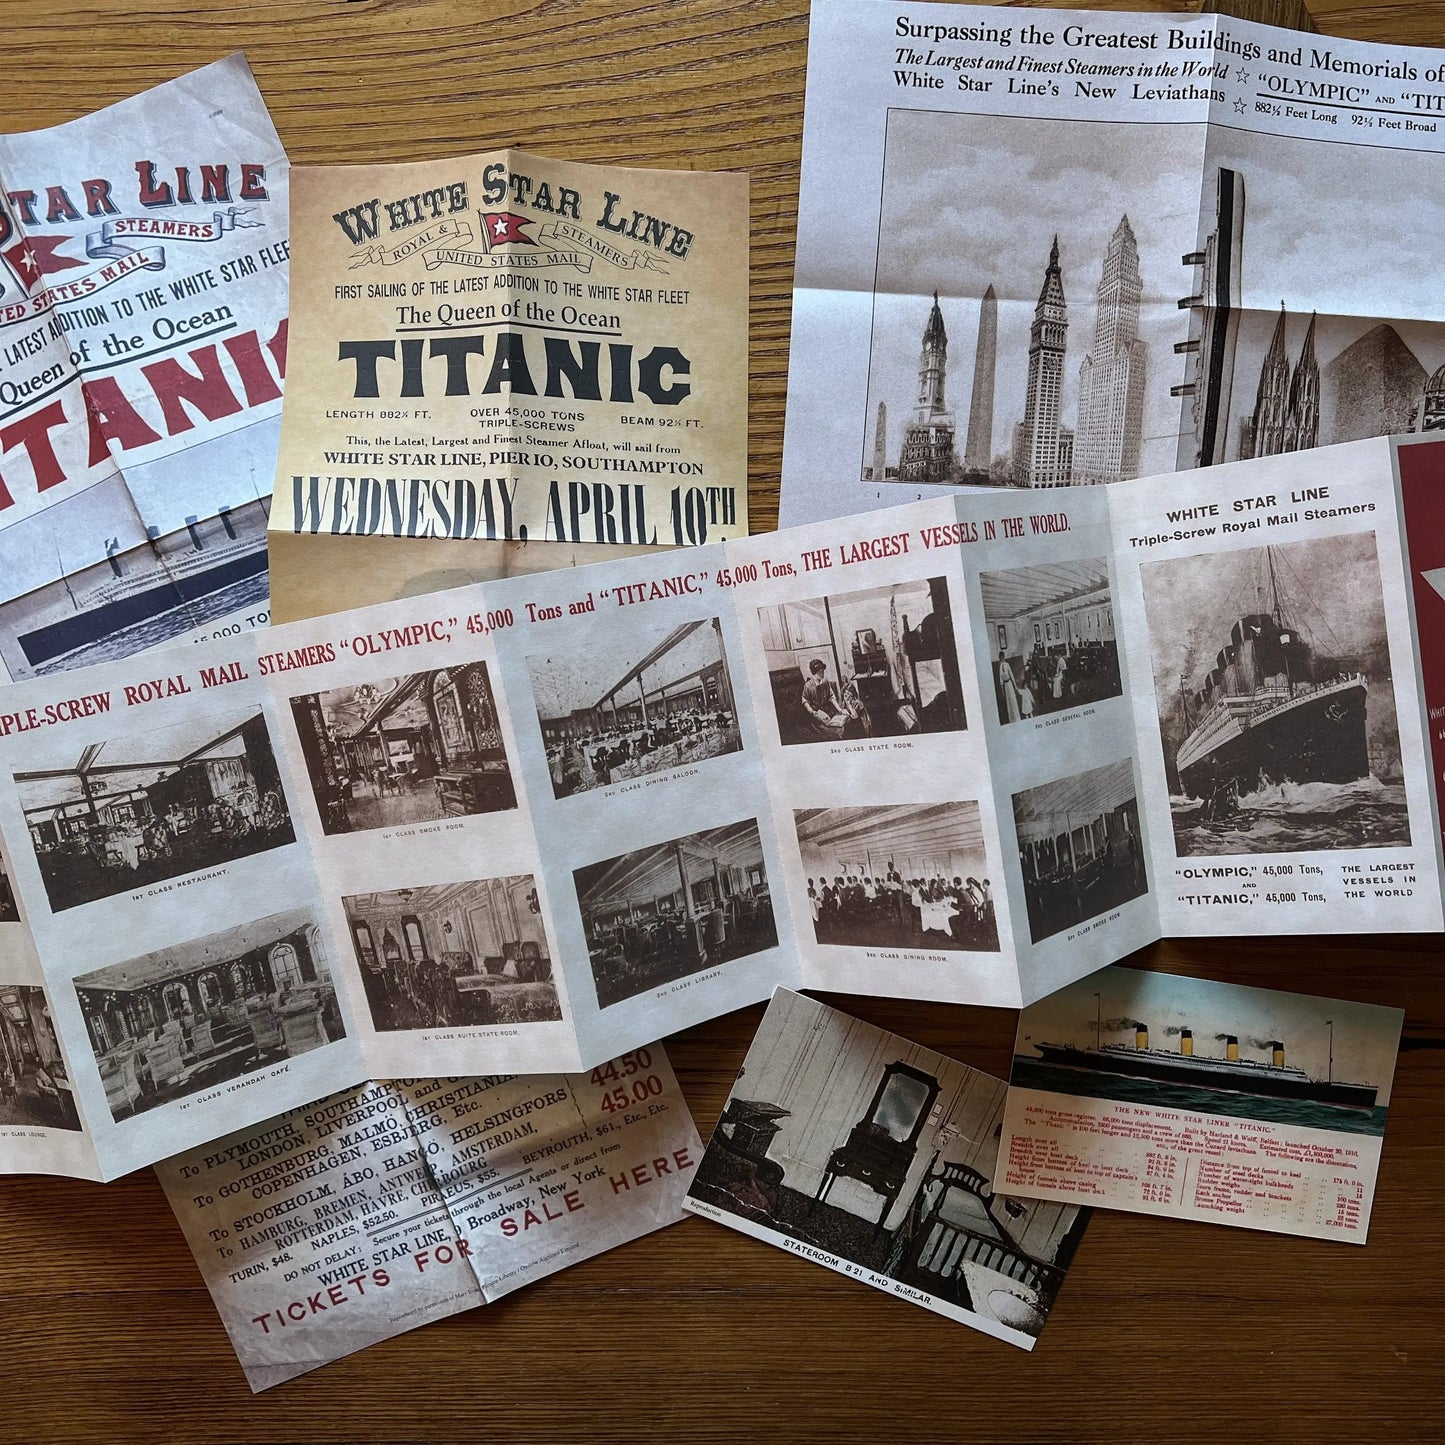 Titanic Document Box with 26 items from launch through memorial service